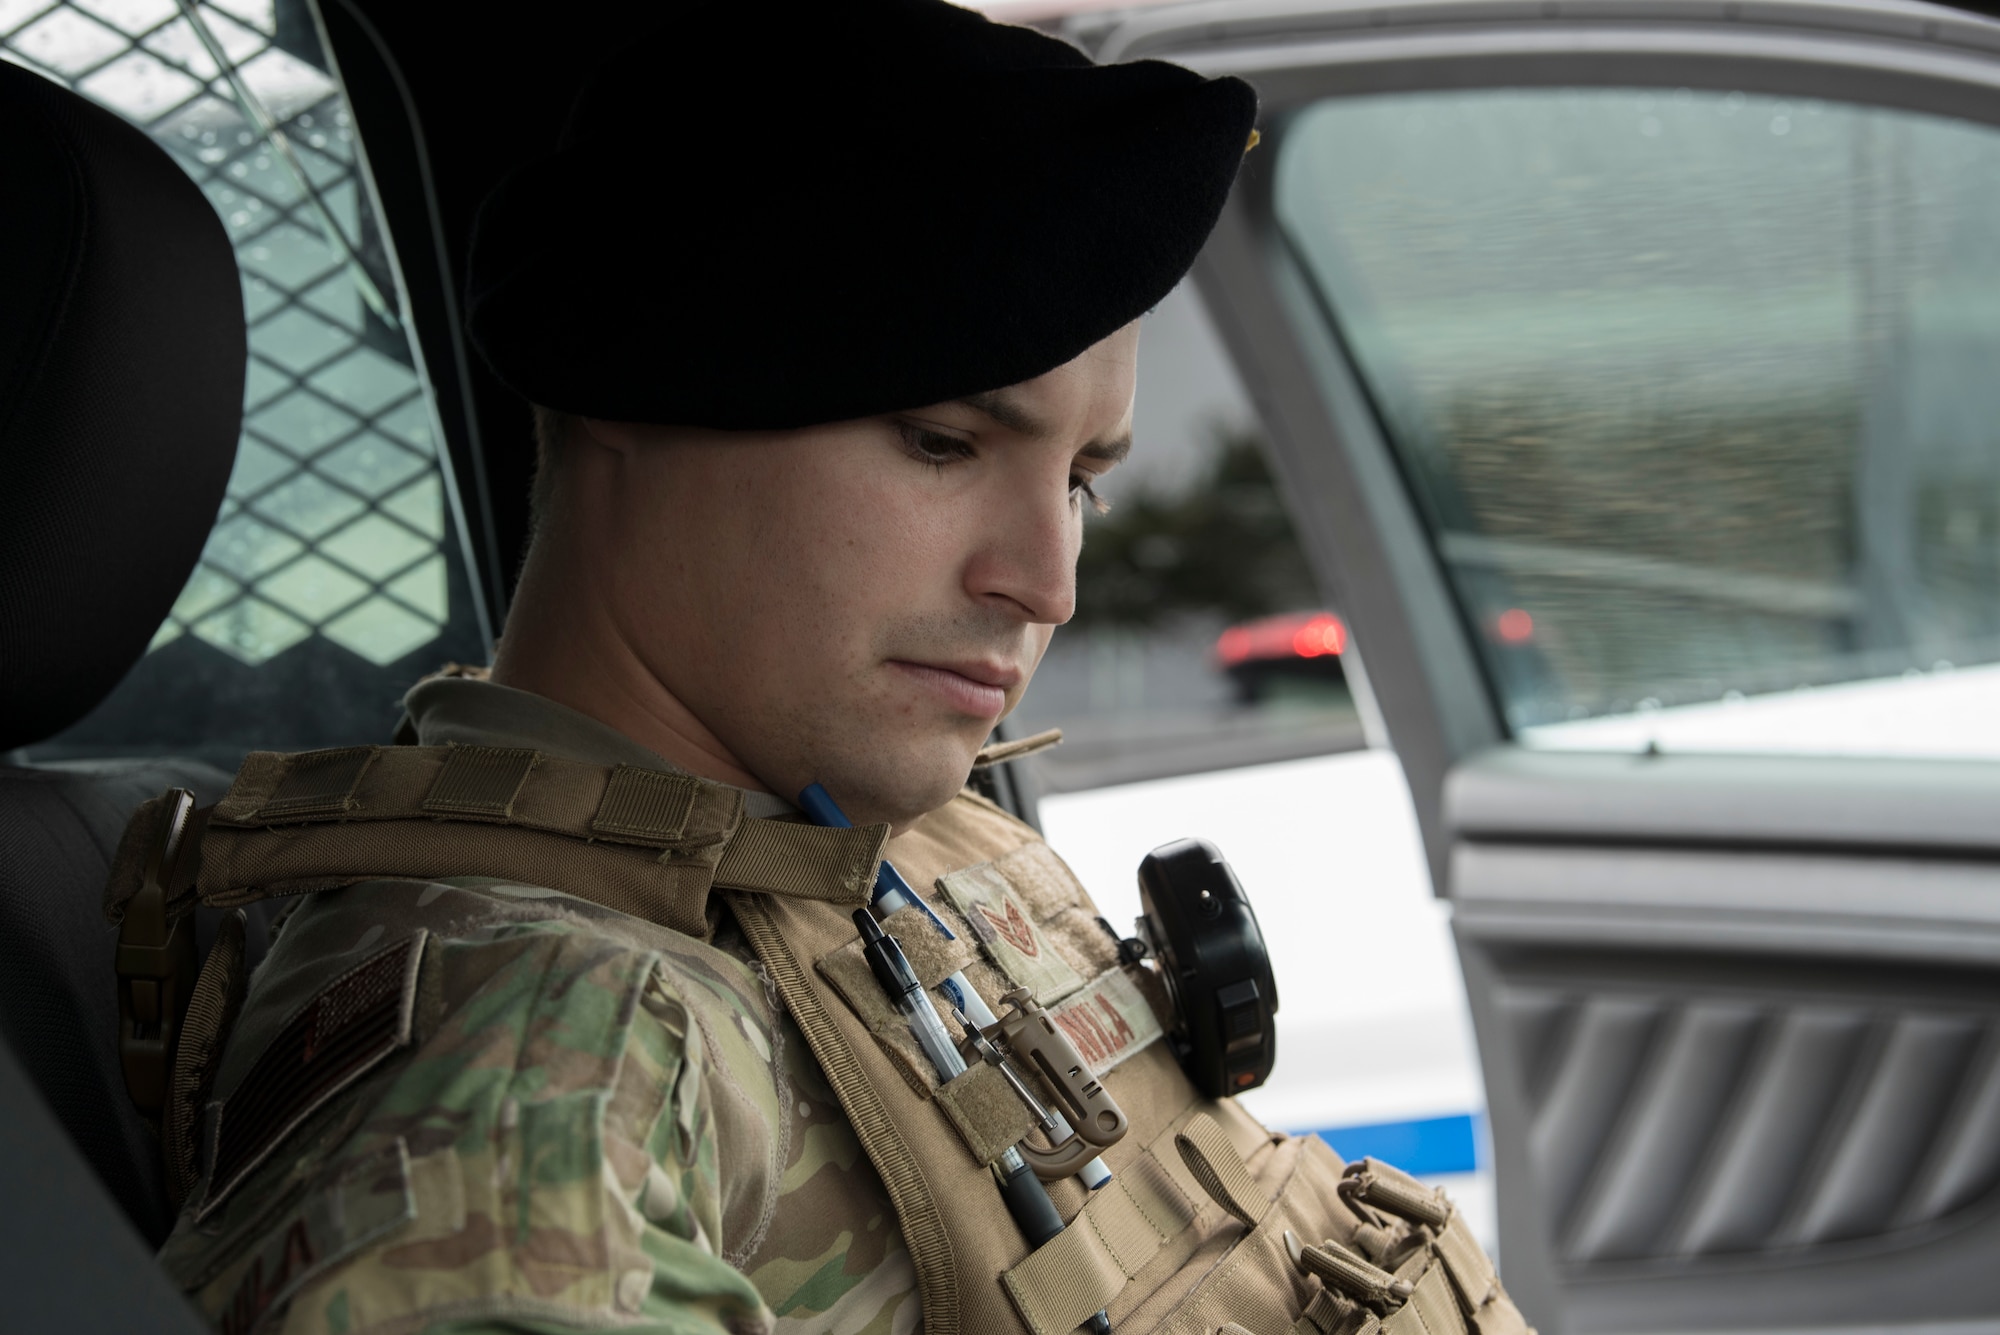 Staff Sgt. Kiley Davila, 45th Security Forces Squadron patrolman, performs his pre-check before a patrol at Patrick Air Force Base, Fla. on March 15, 2019.